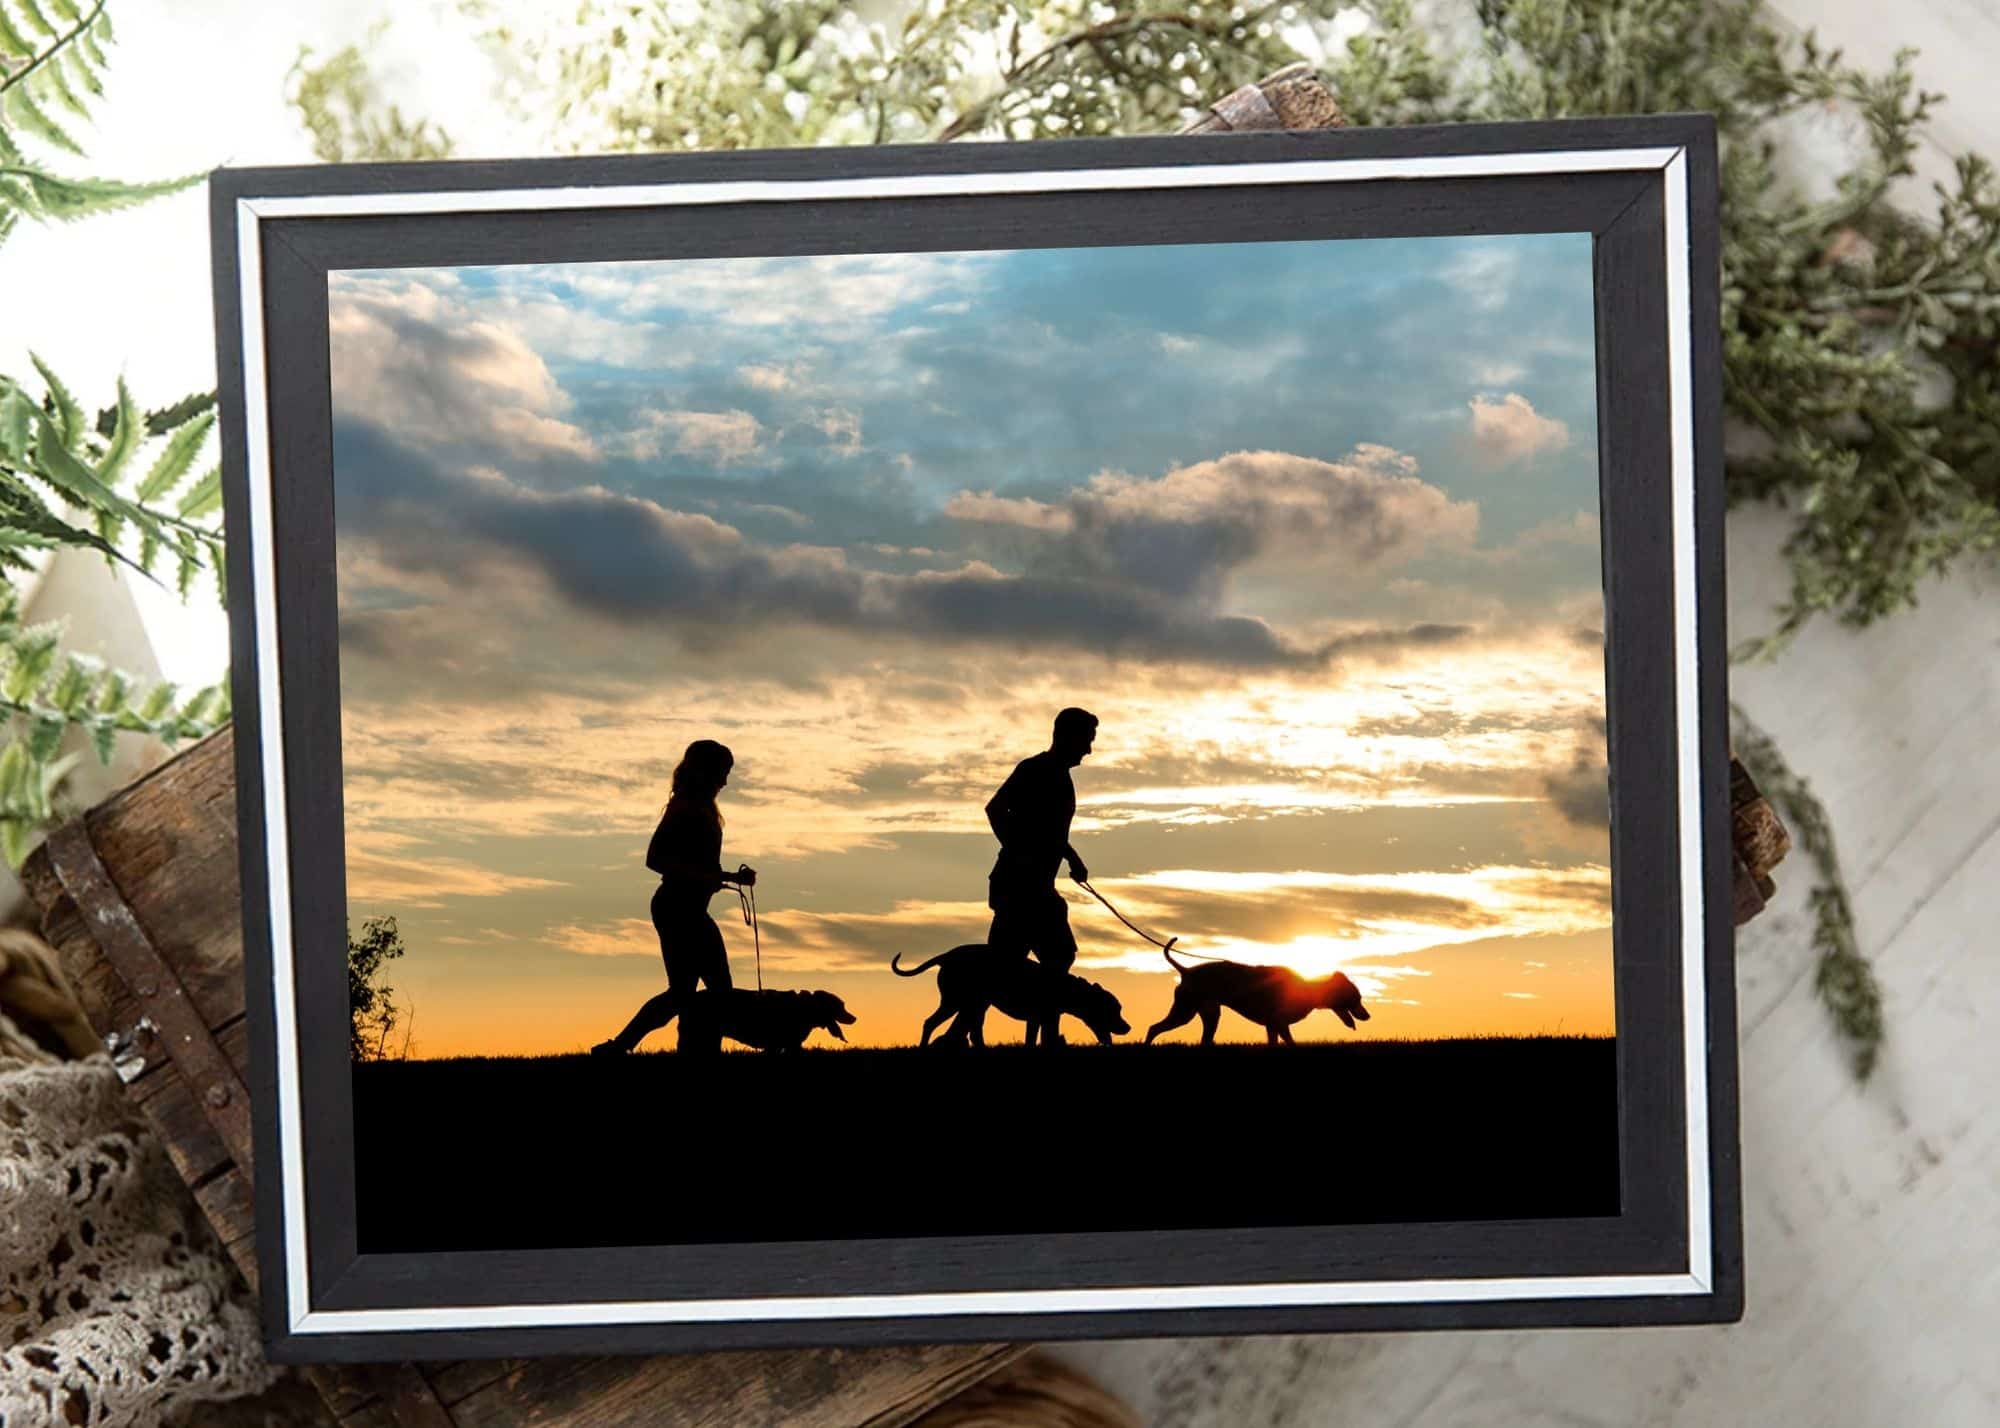 framed black craftsman-style barnwood frame of a family with their dogs at sunset in silhouette